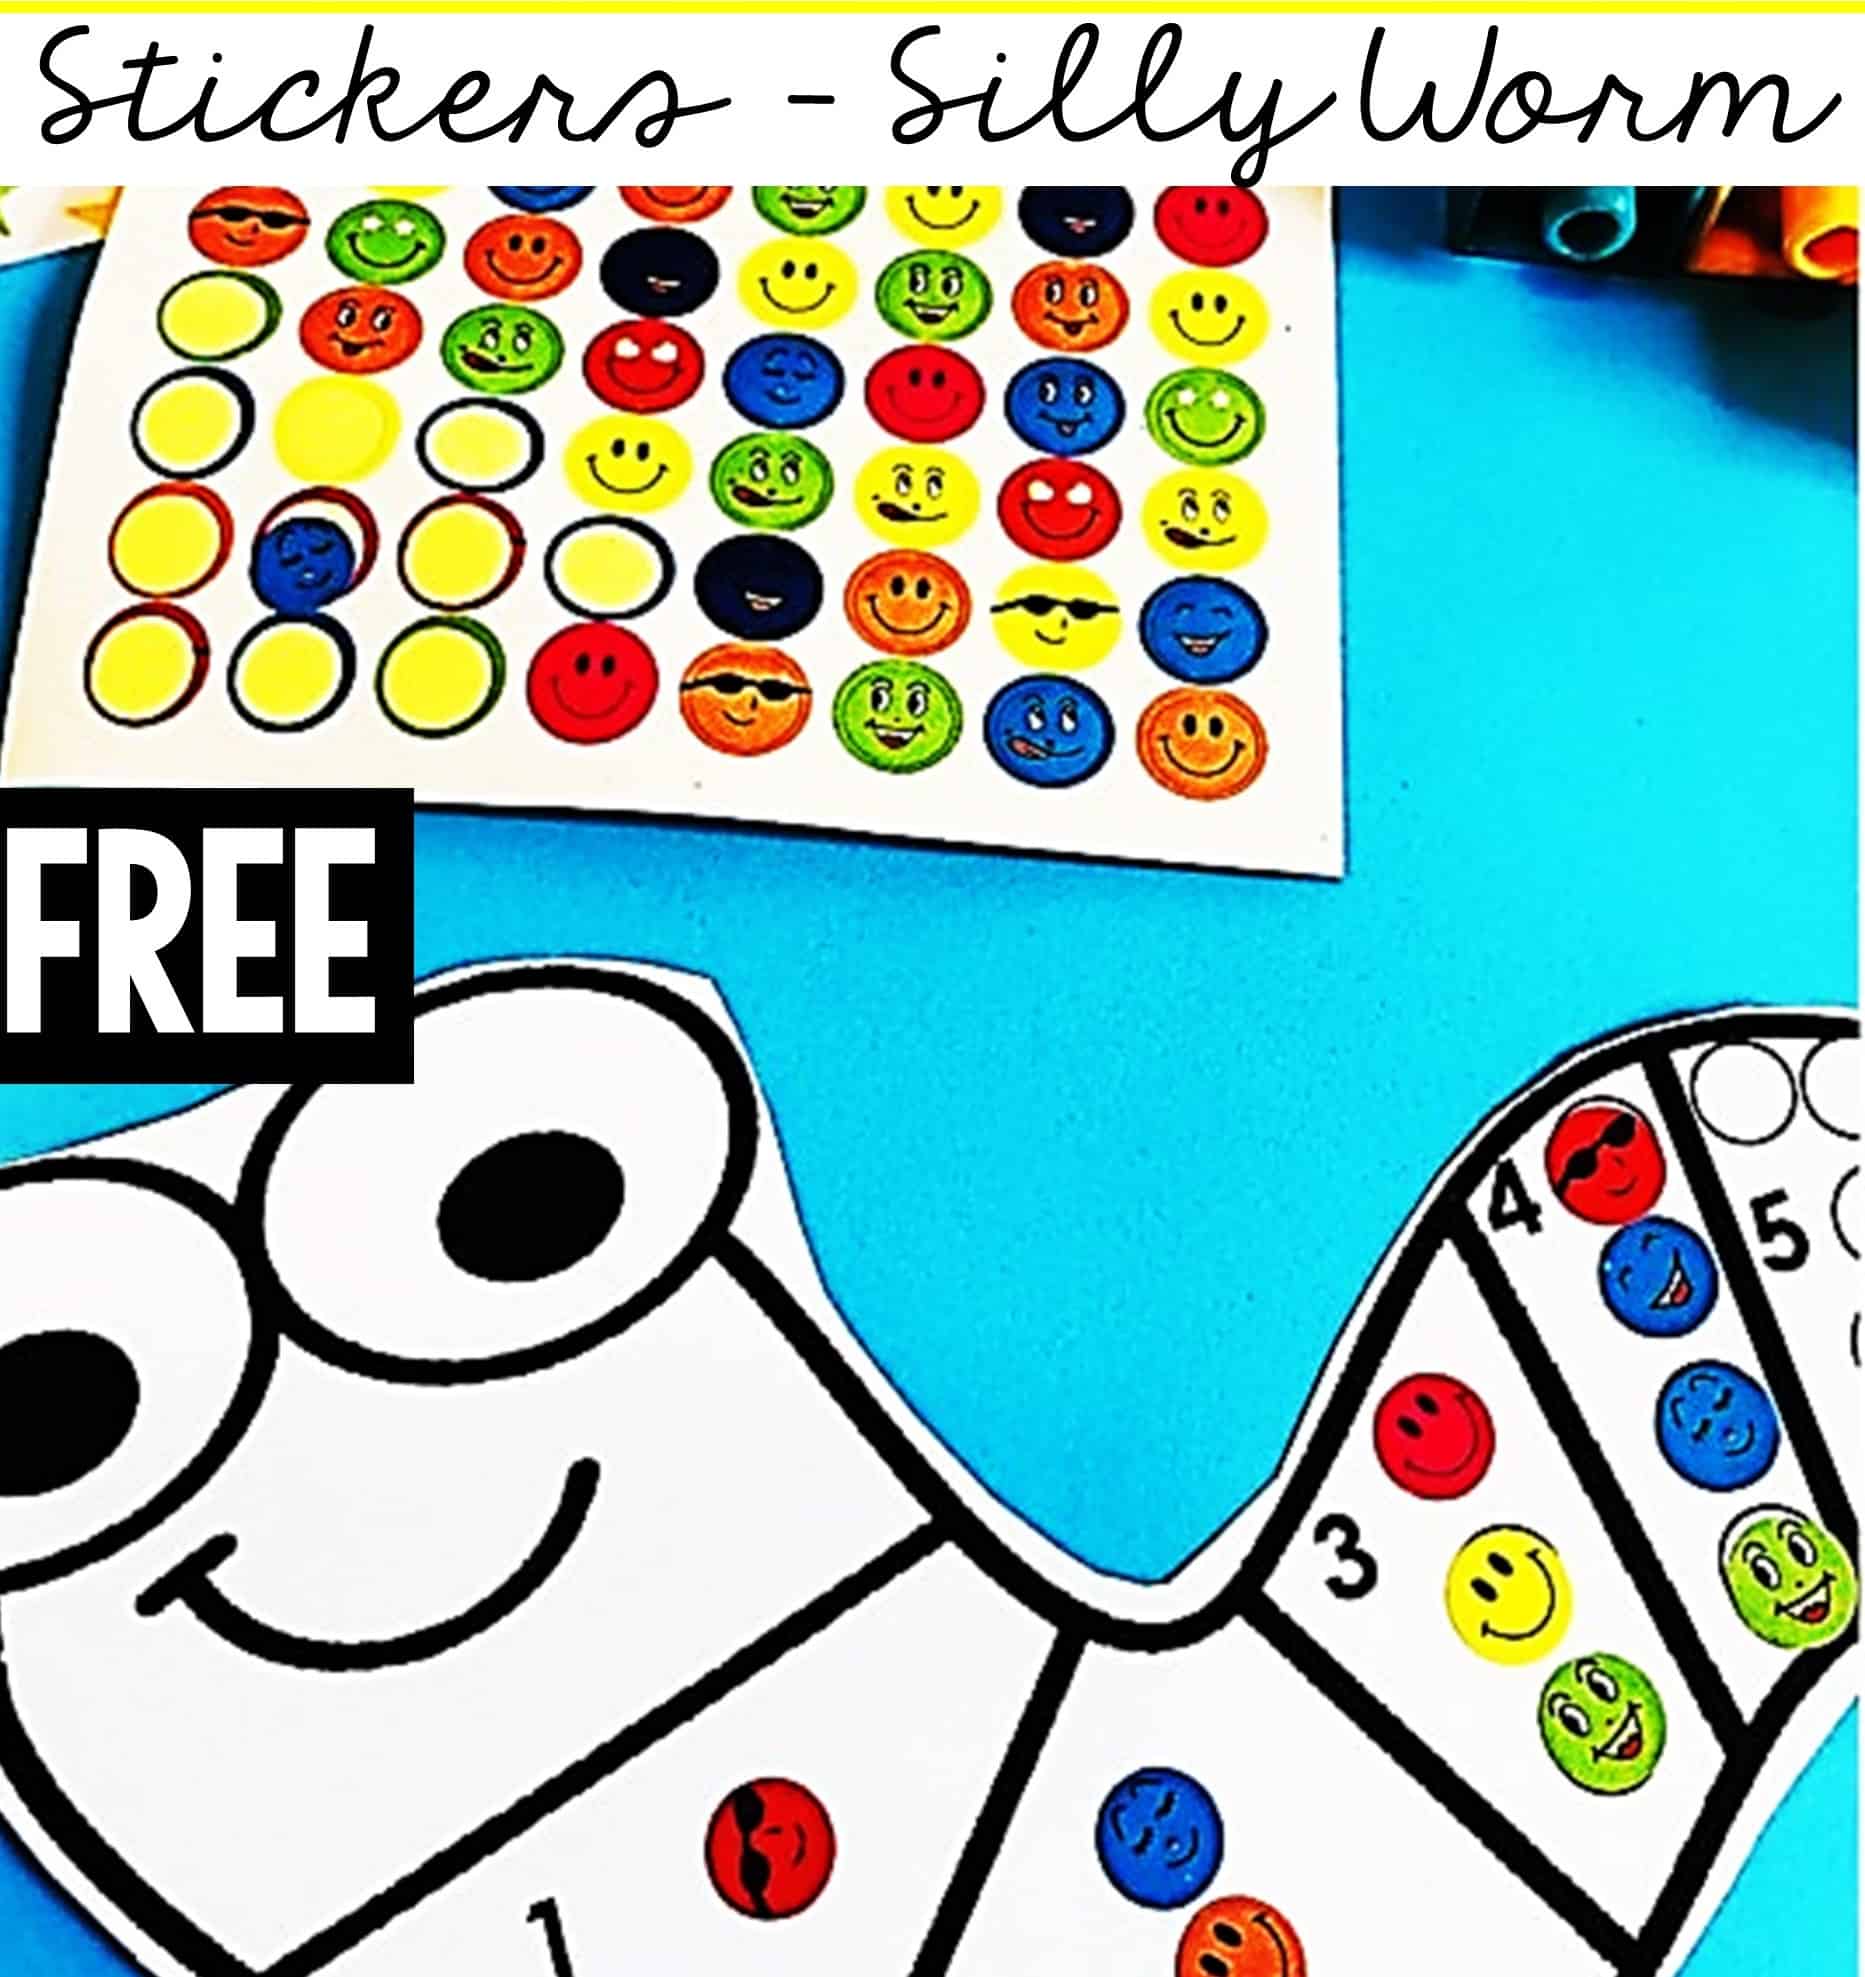 This Counting 1 to 10 Dot Stickers Silly Worms activity will sure be a hit with your little learners! Looking for a fun way to get kids to count and show their numbers? These fun fun silly worms themed printable cards are perfect for that. Learners will identify the number on each section and then place that many dot stickers to fill the 'dots on their silly worms'.